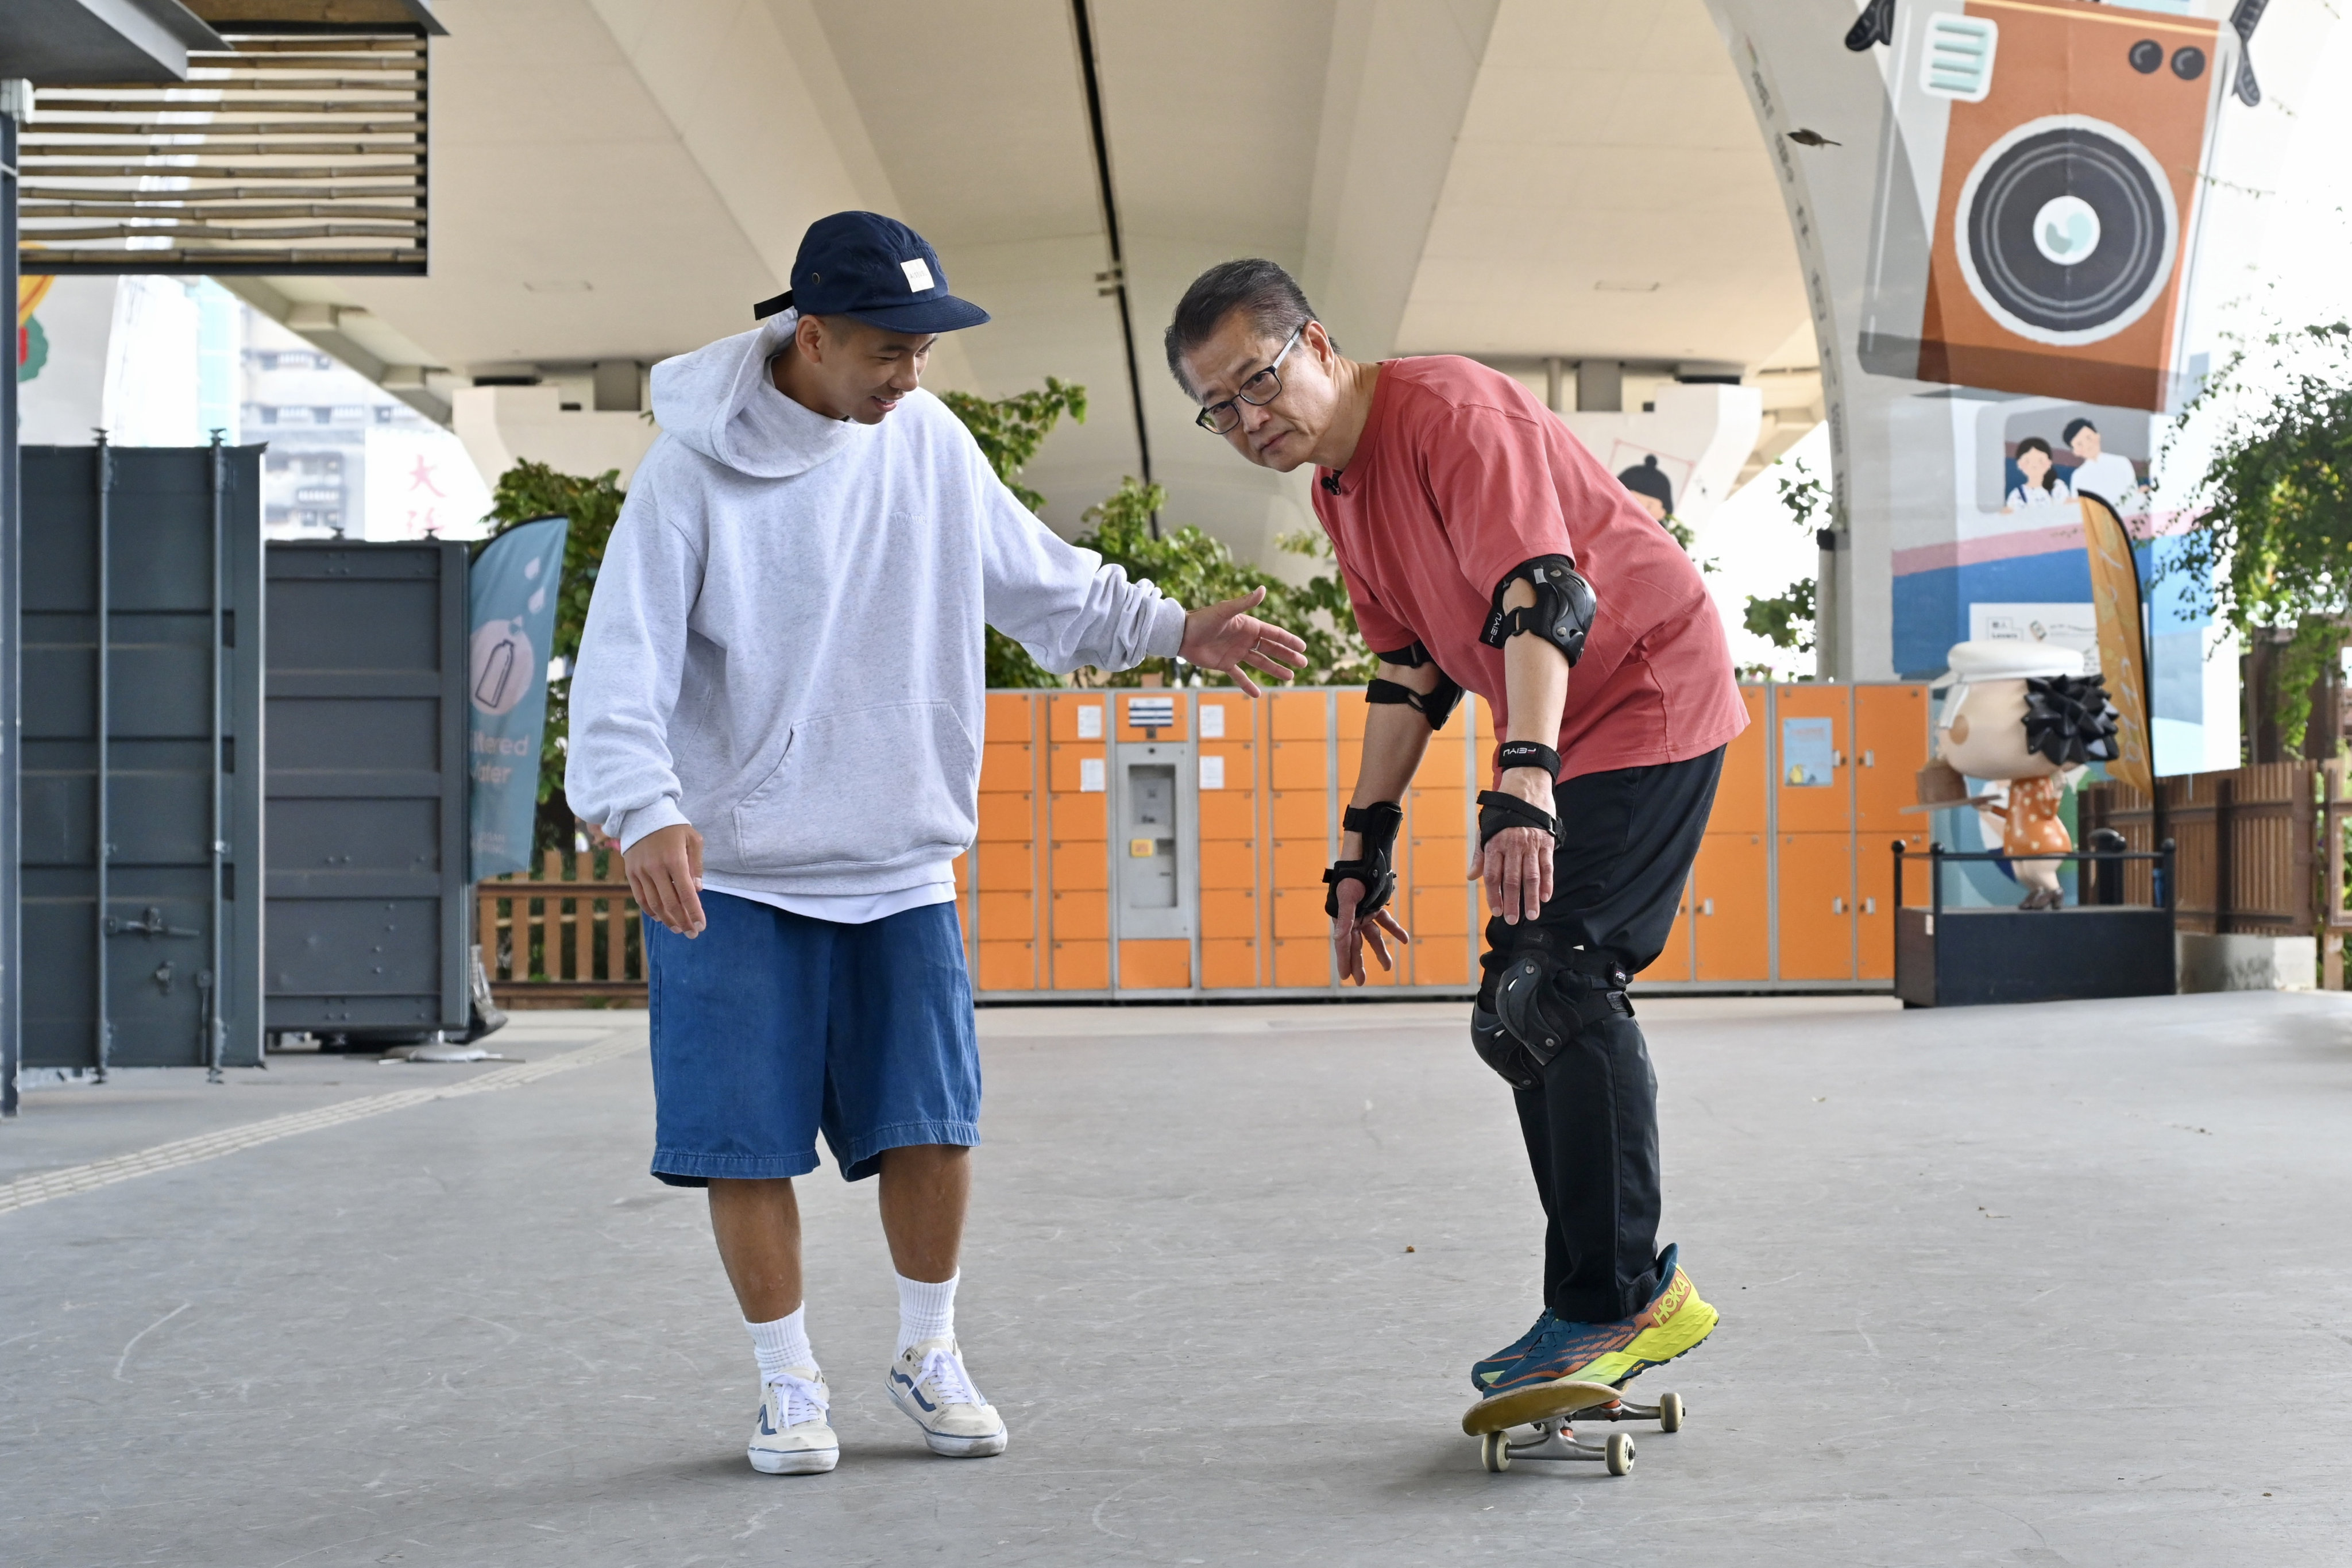 Financial Secretary Paul Chan (right) during last week’s skateboarding session with professional athlete Luk Chun-yin. Photo: Handout